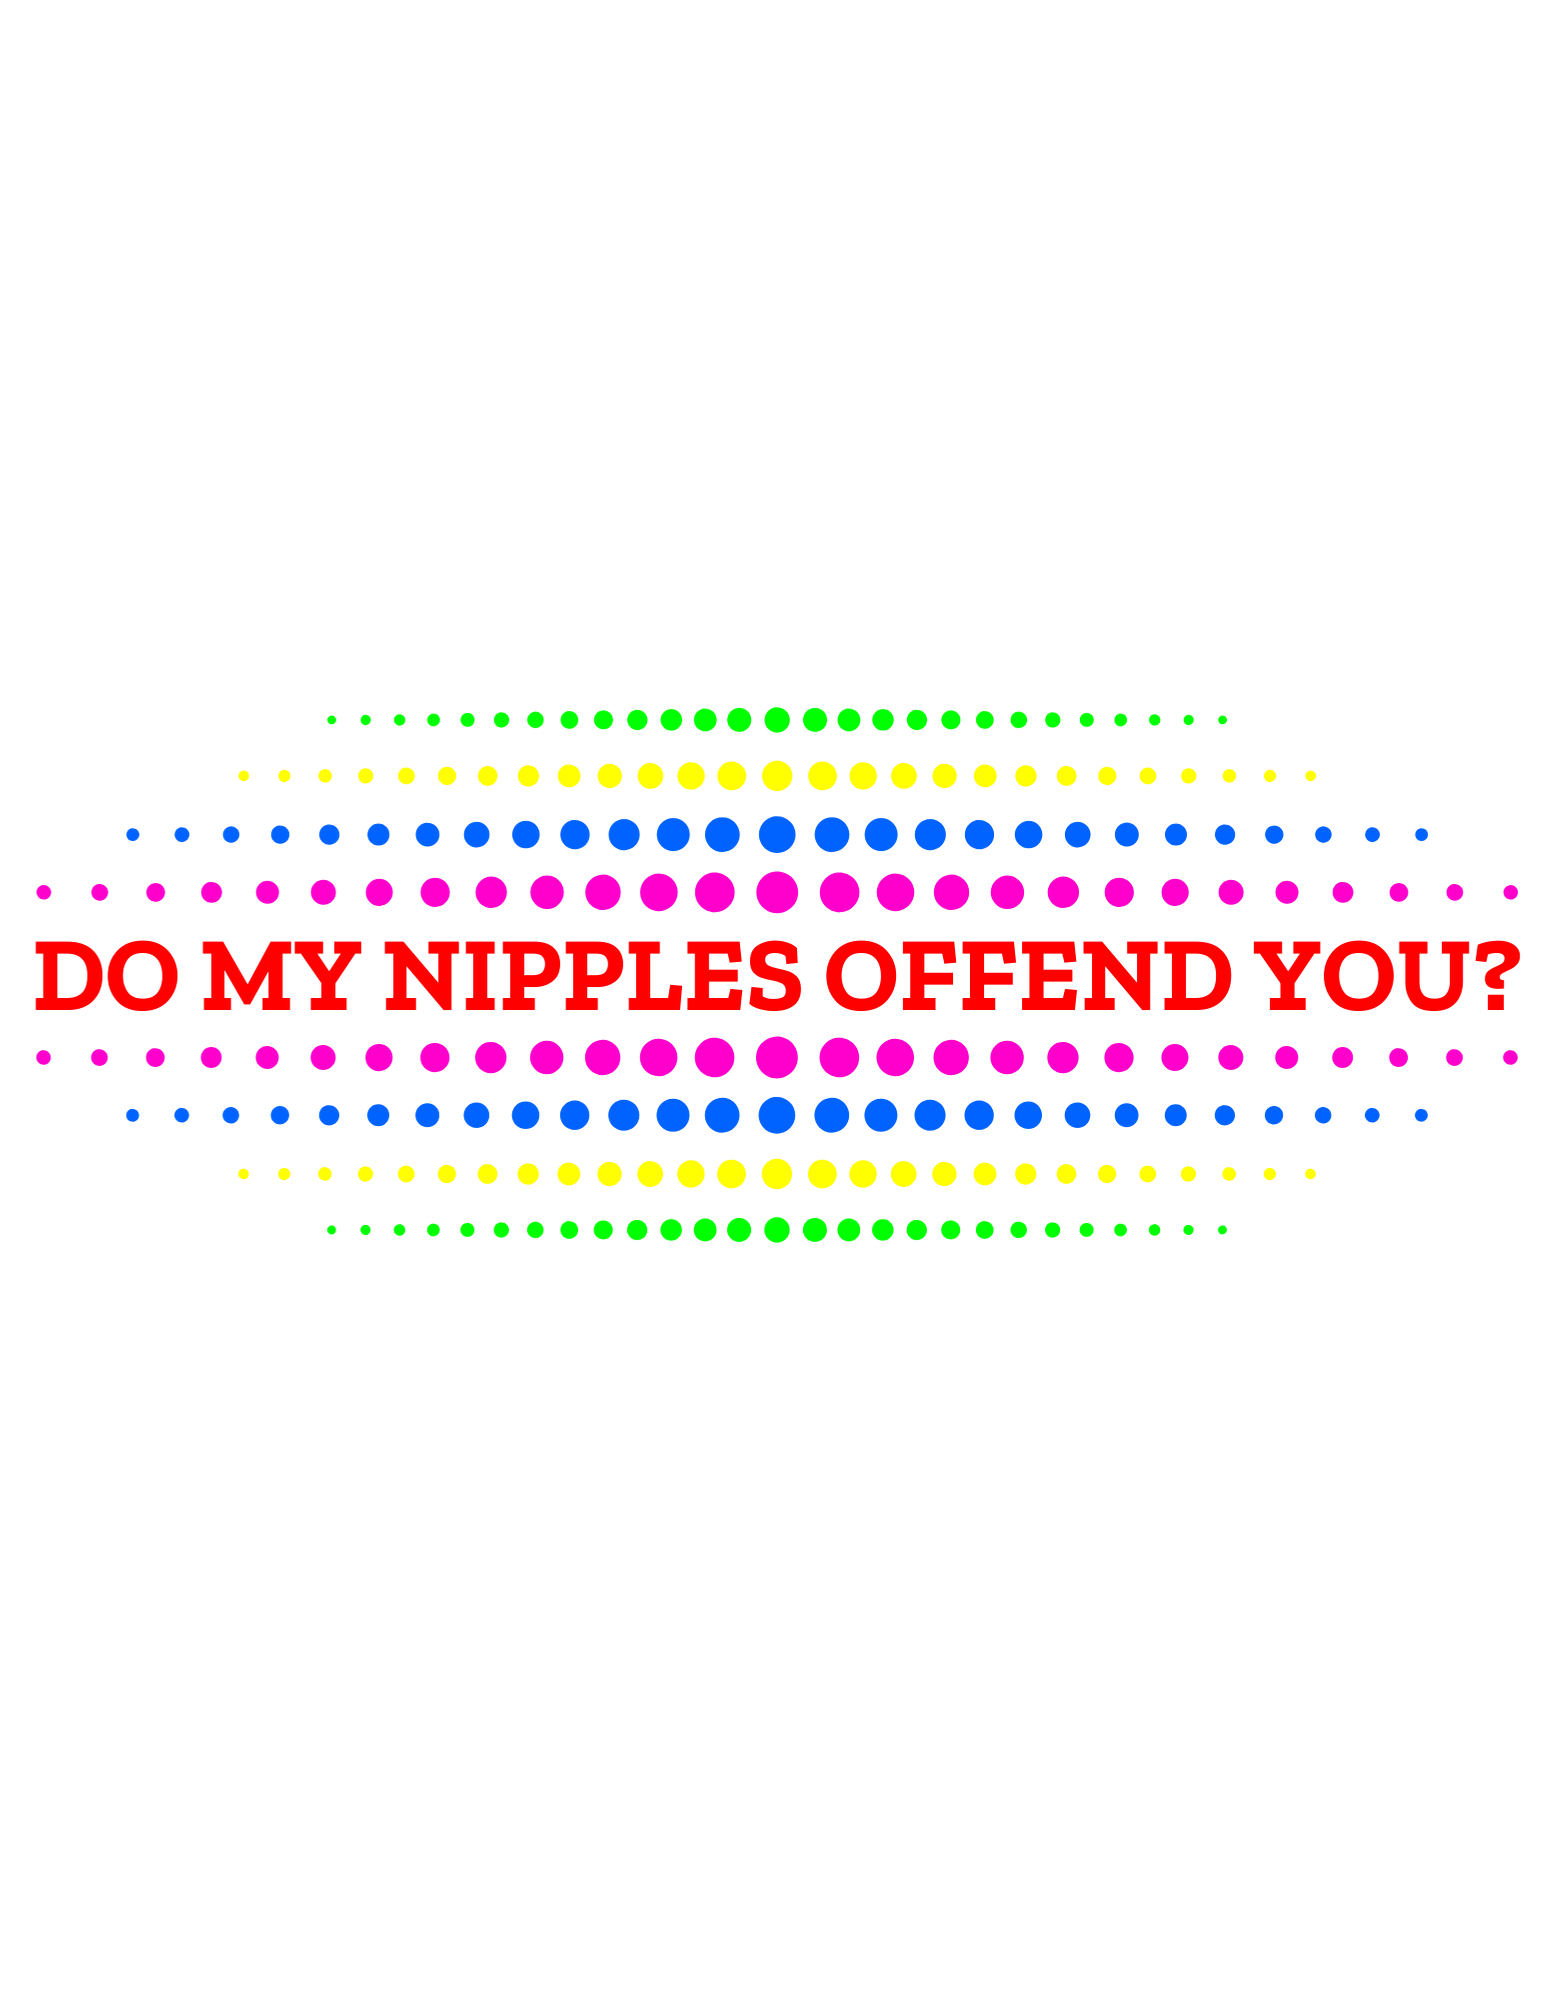 Offended Nipples